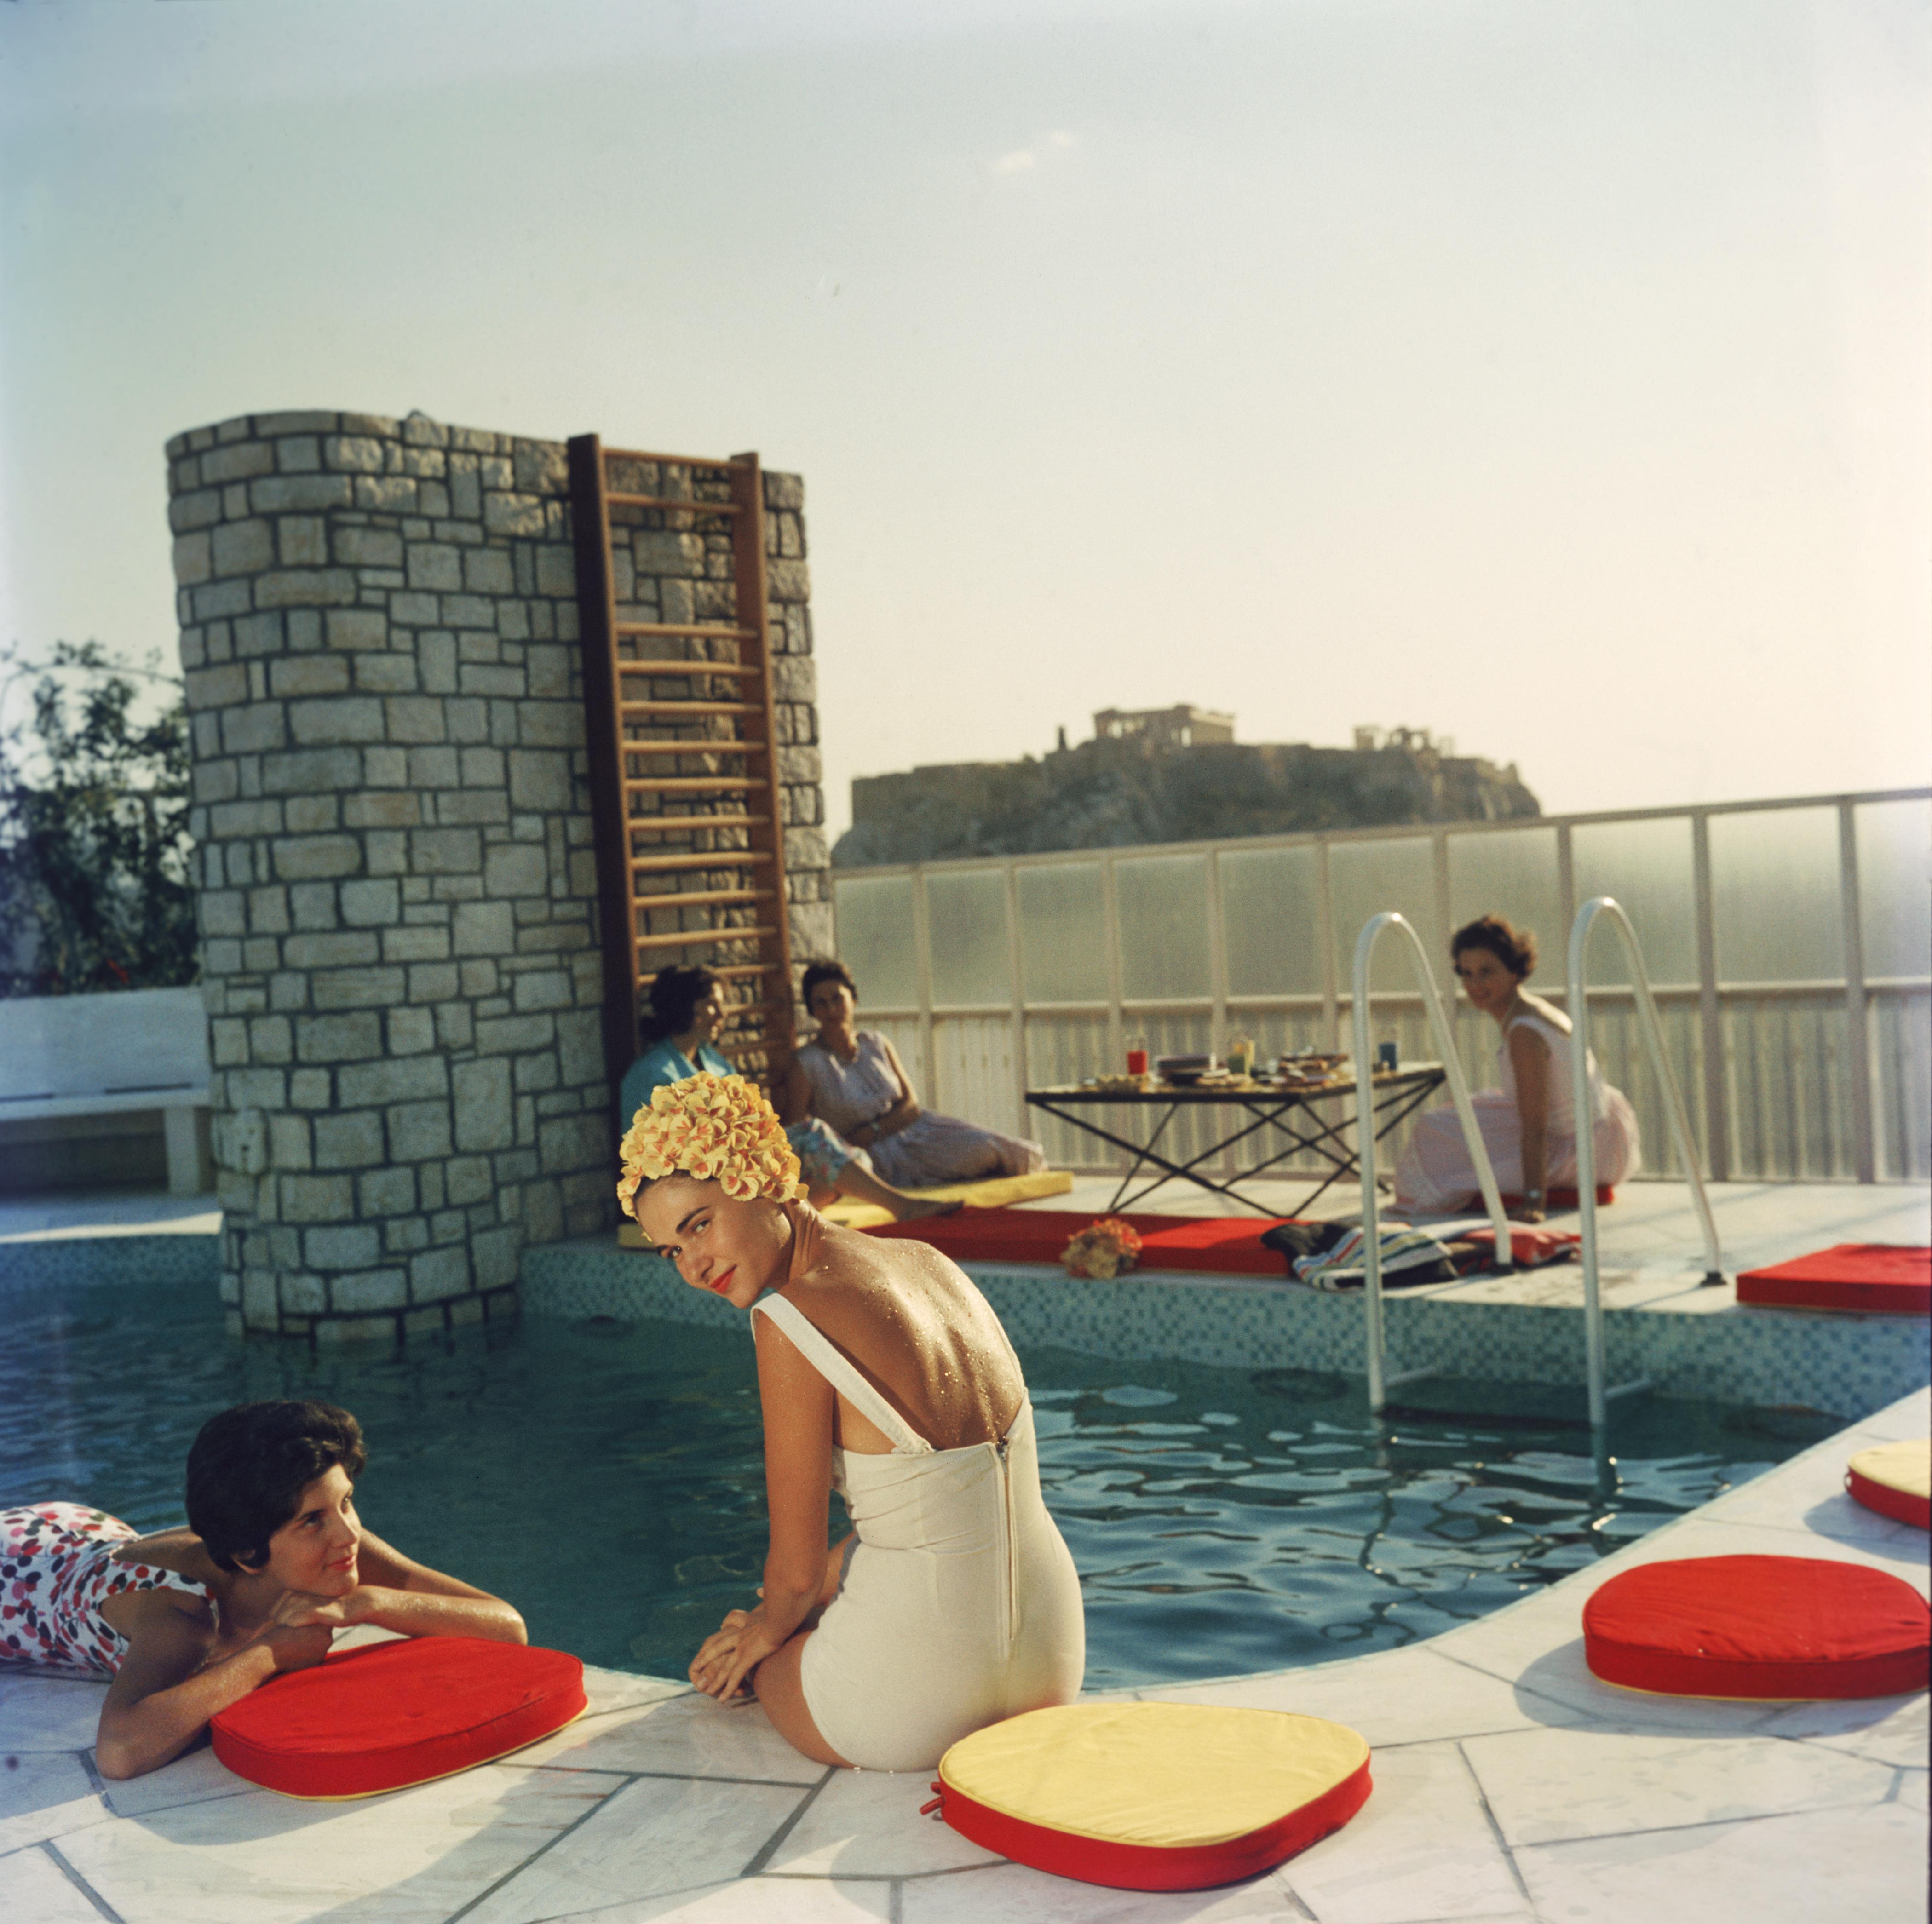 'Penthouse Pool' 1961 Slim Aarons Limited Estate Edition
Young women by the Canellopoulos penthouse pool, Athens, July 1961. 

Slim Aarons Chromogenic C print 
Printed Later 
Slim Aarons Estate Edition 
Produced utilising the only original